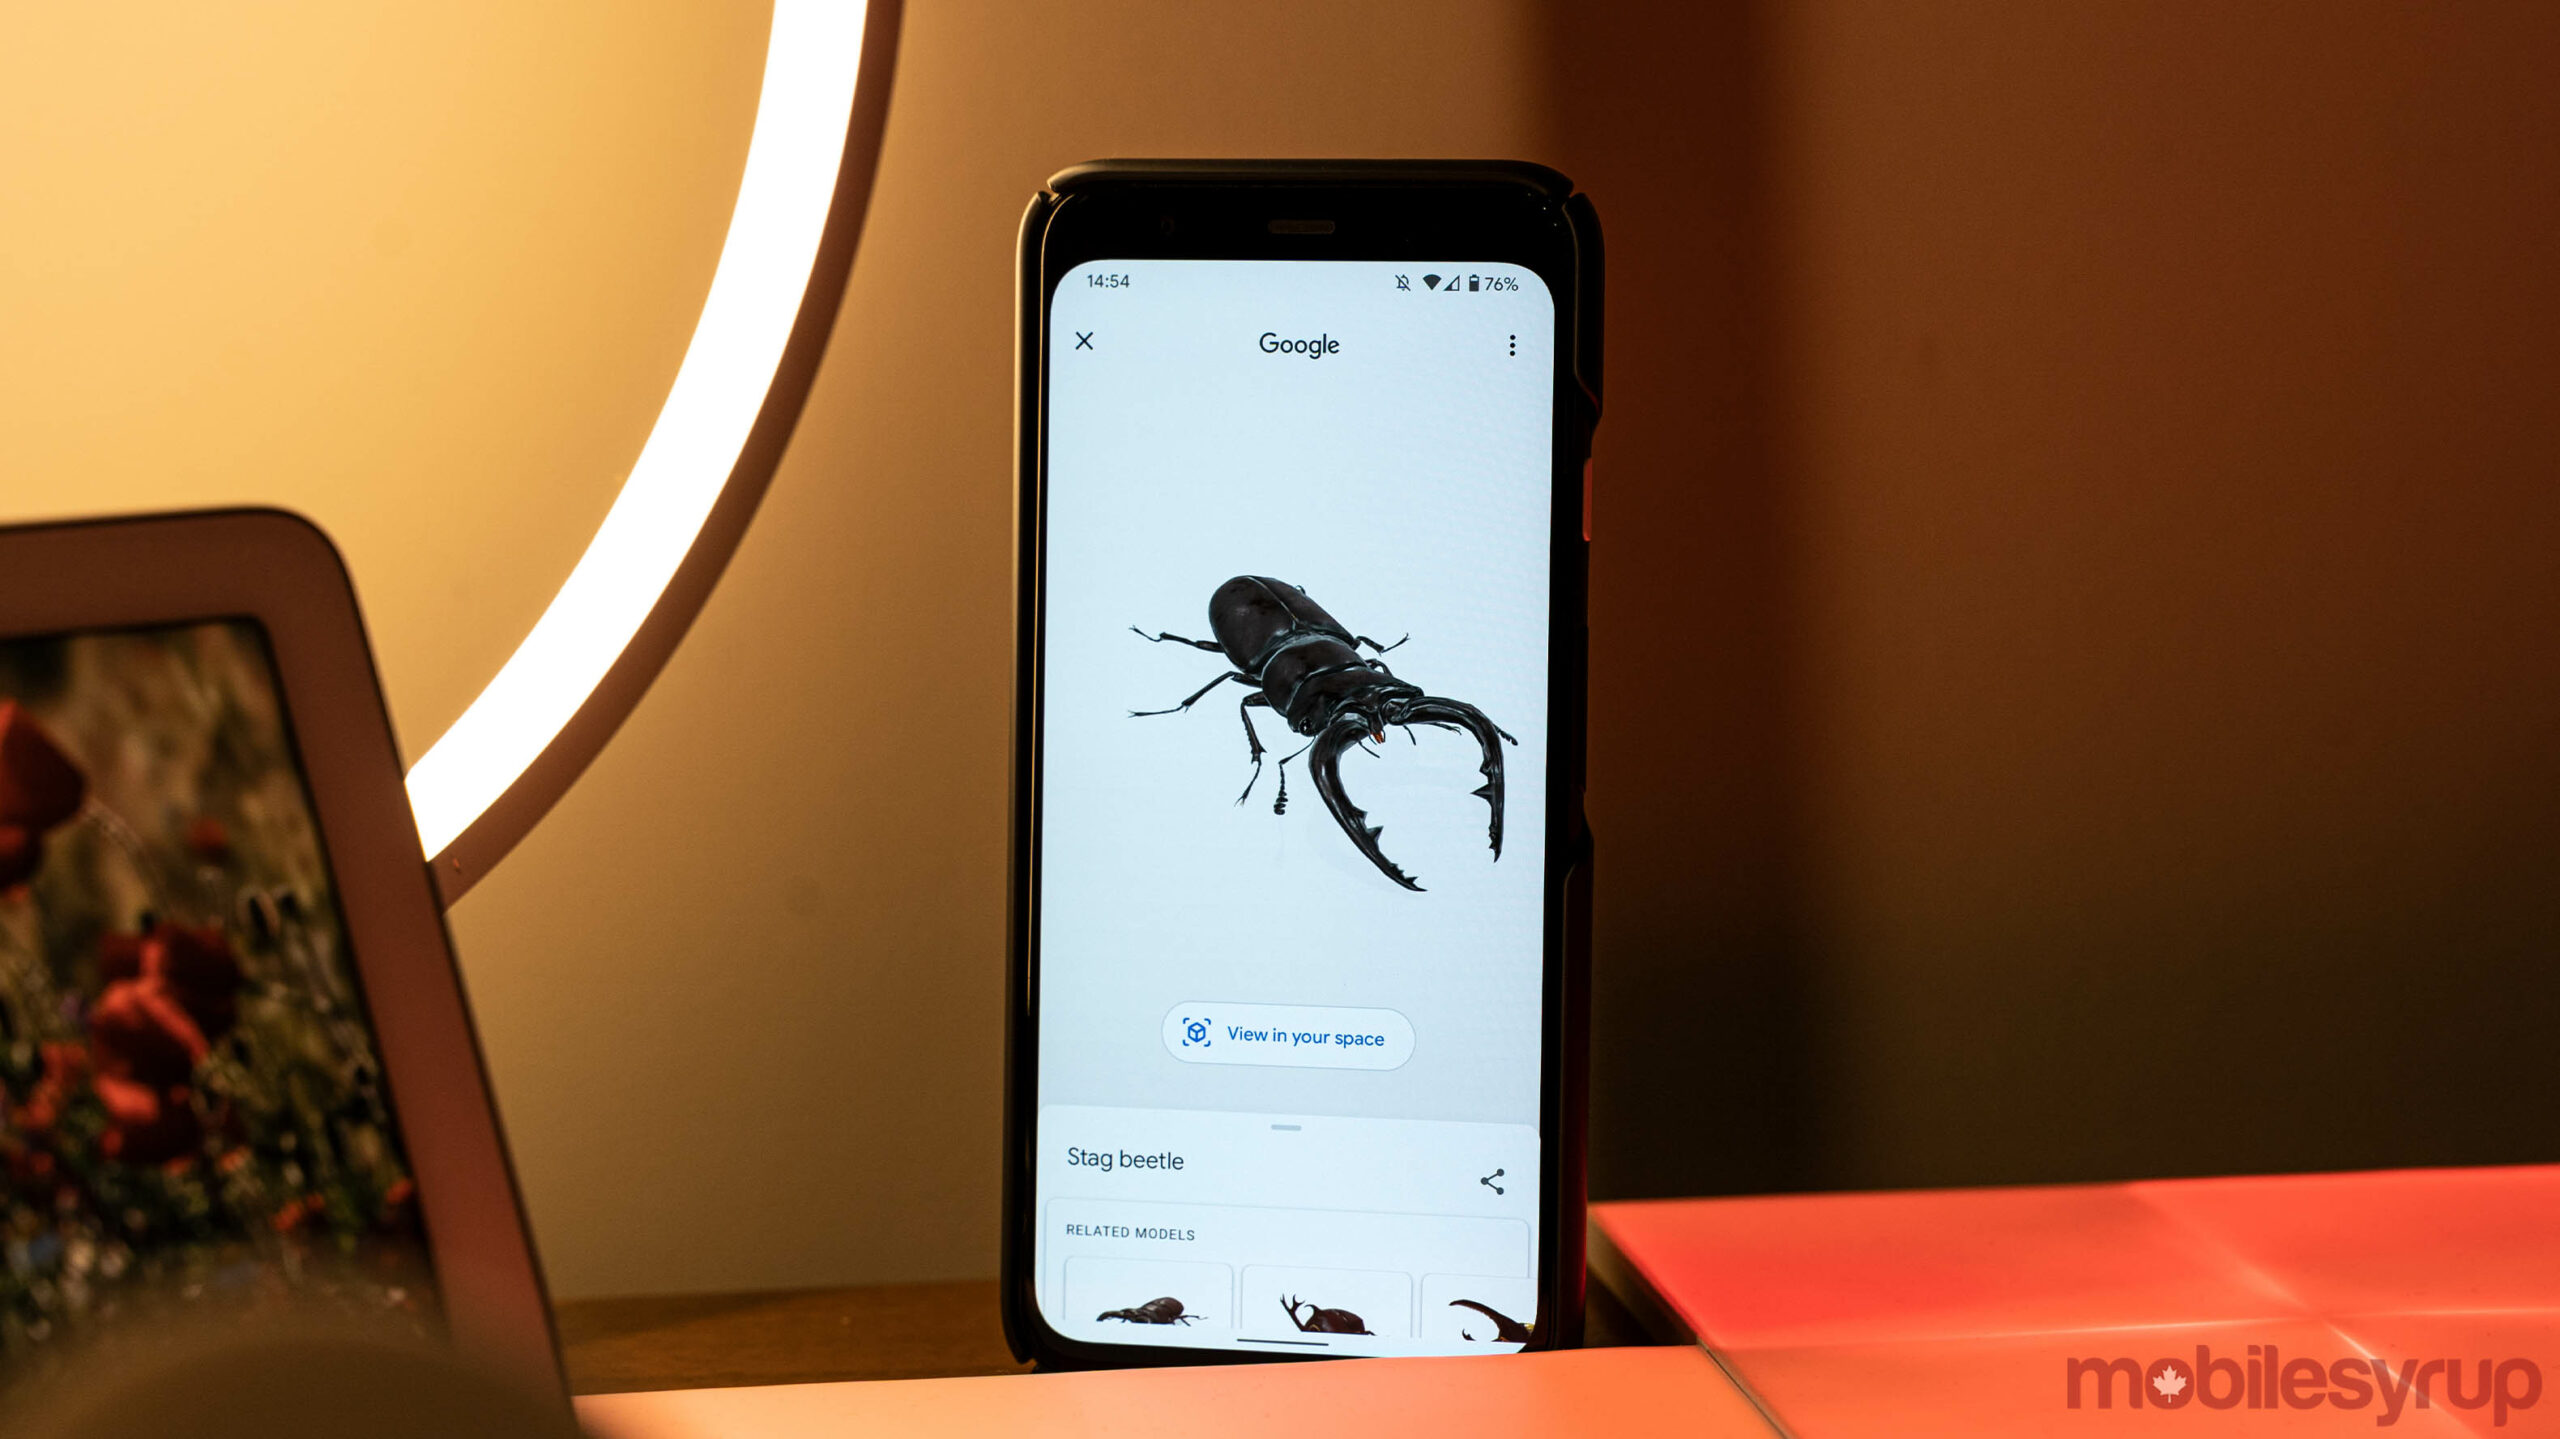 Google adds 23 insects to its AR animals search feature